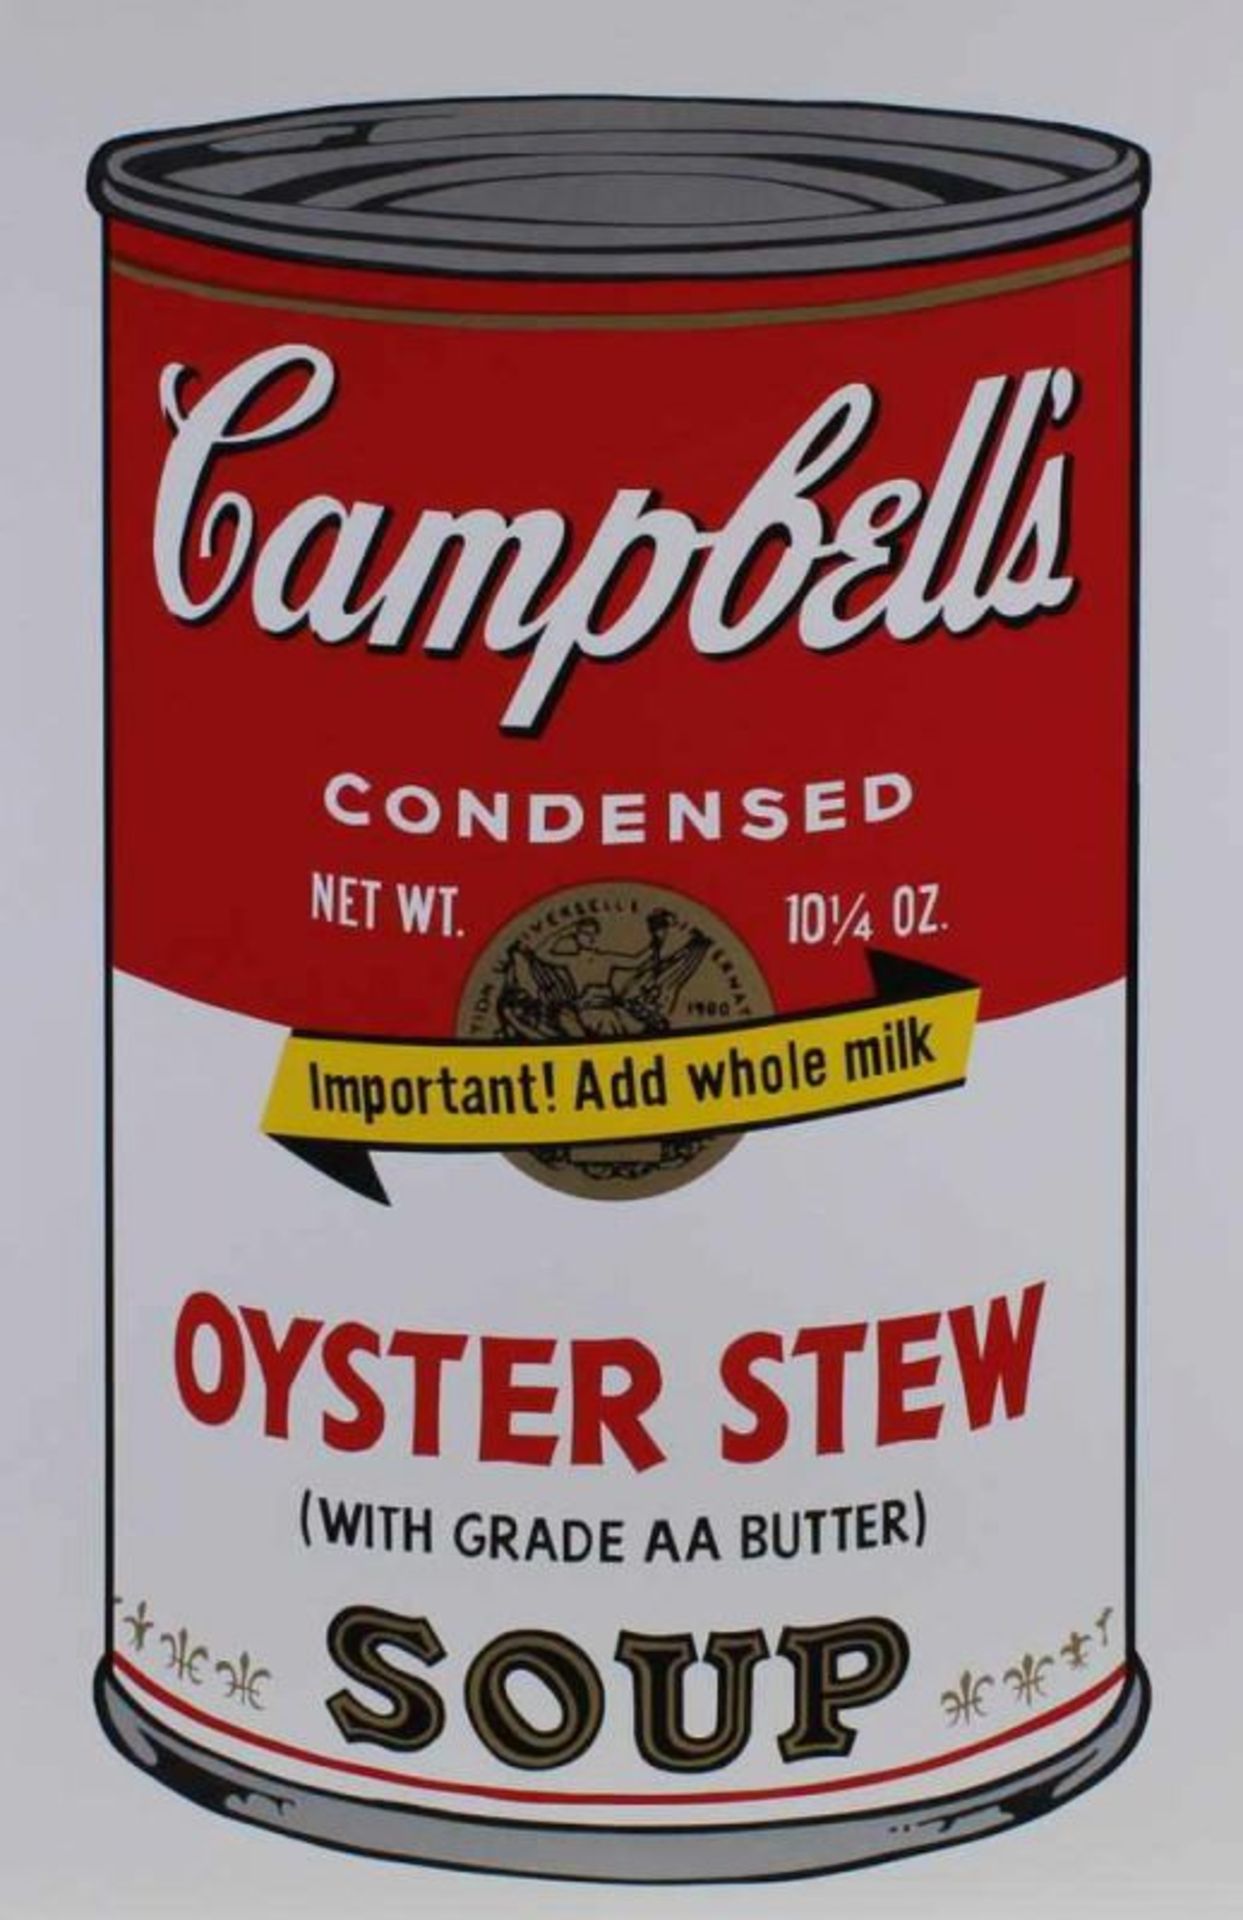 Warhol, Andy (1928 Pittsburgh - 1987 New York), 10 Farbserigrafien, "Campbell's", published by